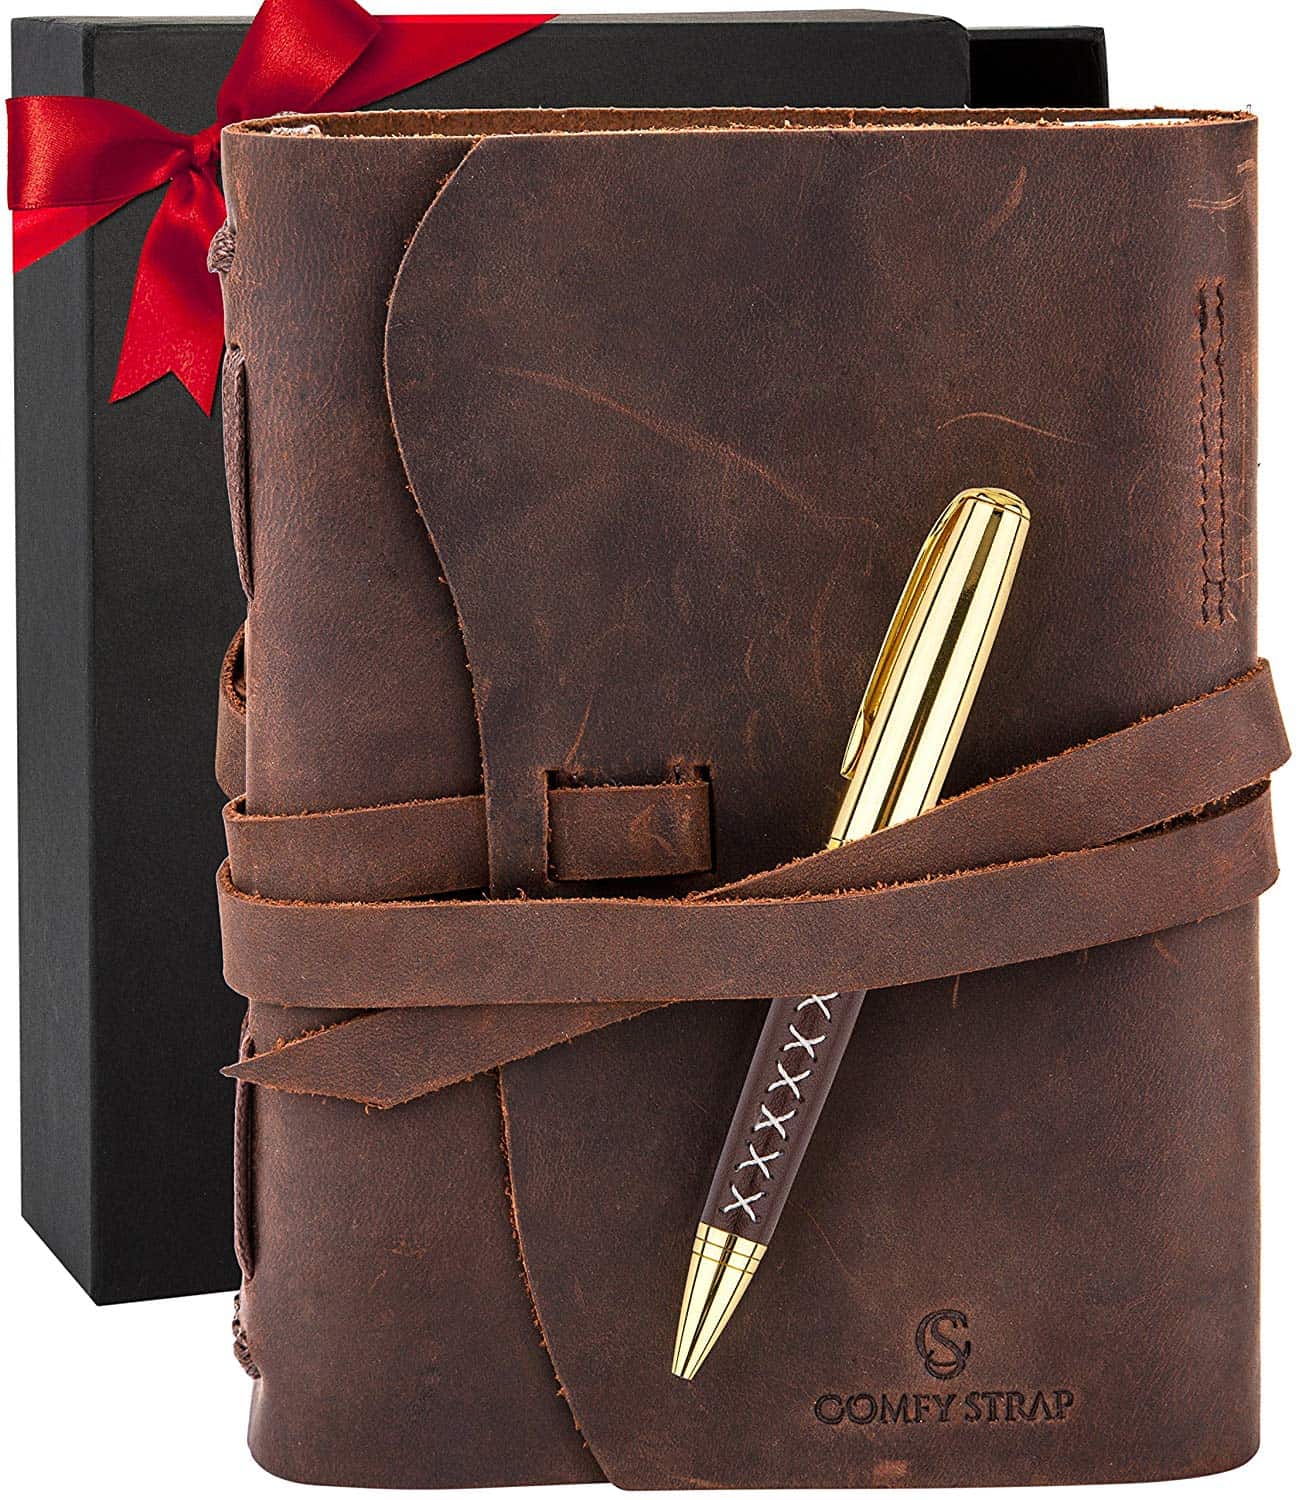 Gifts for Writers The Ultimate Guide to the Best Gifts for Writers